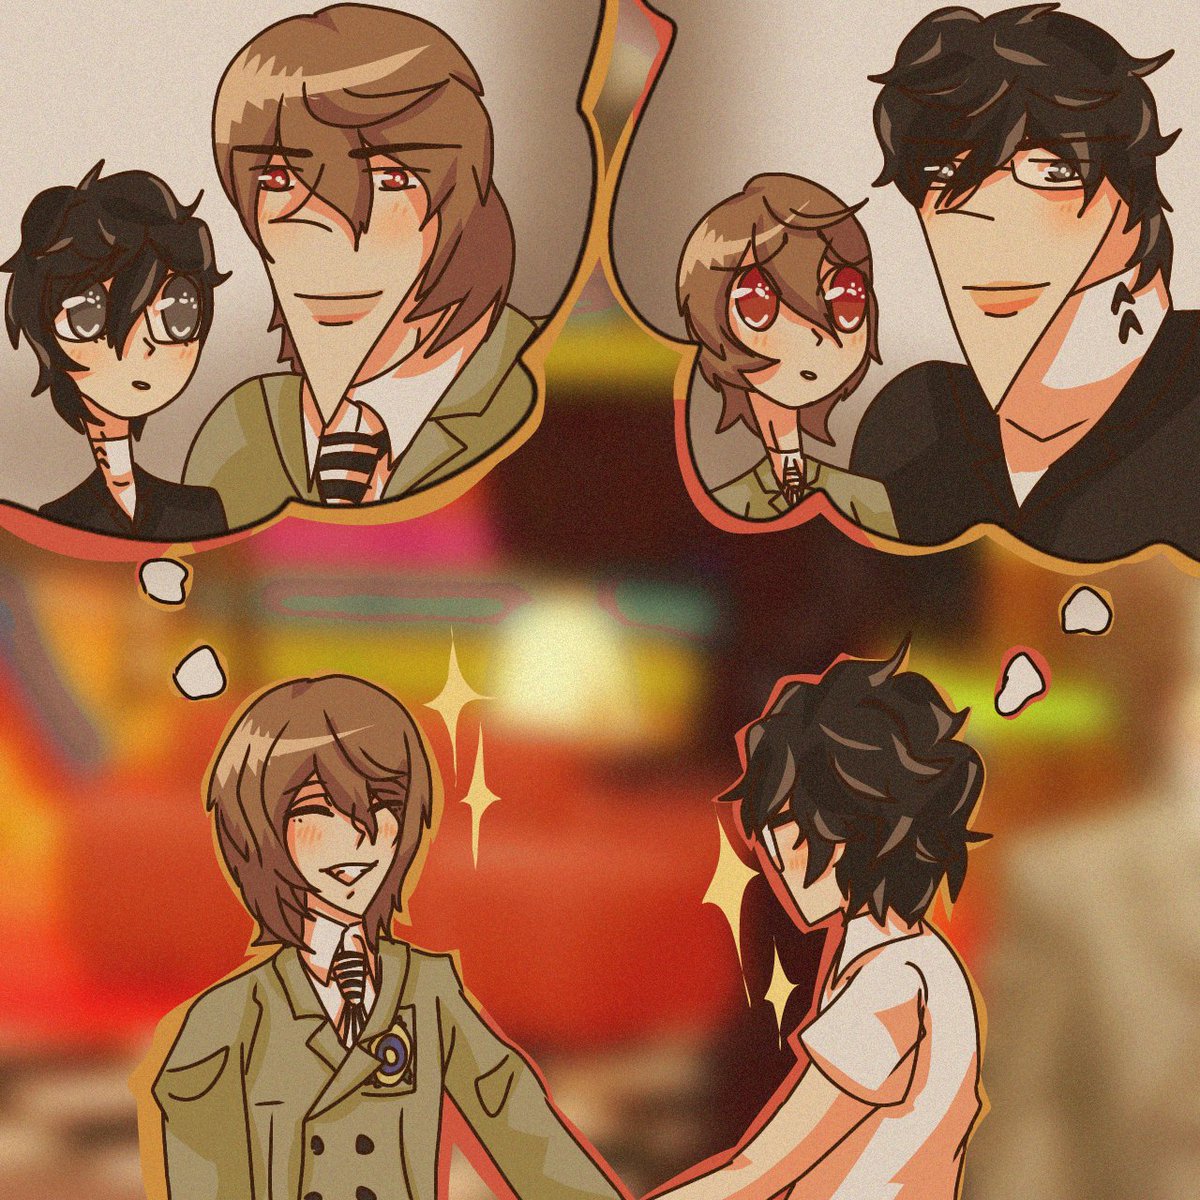 The truth about Shuake